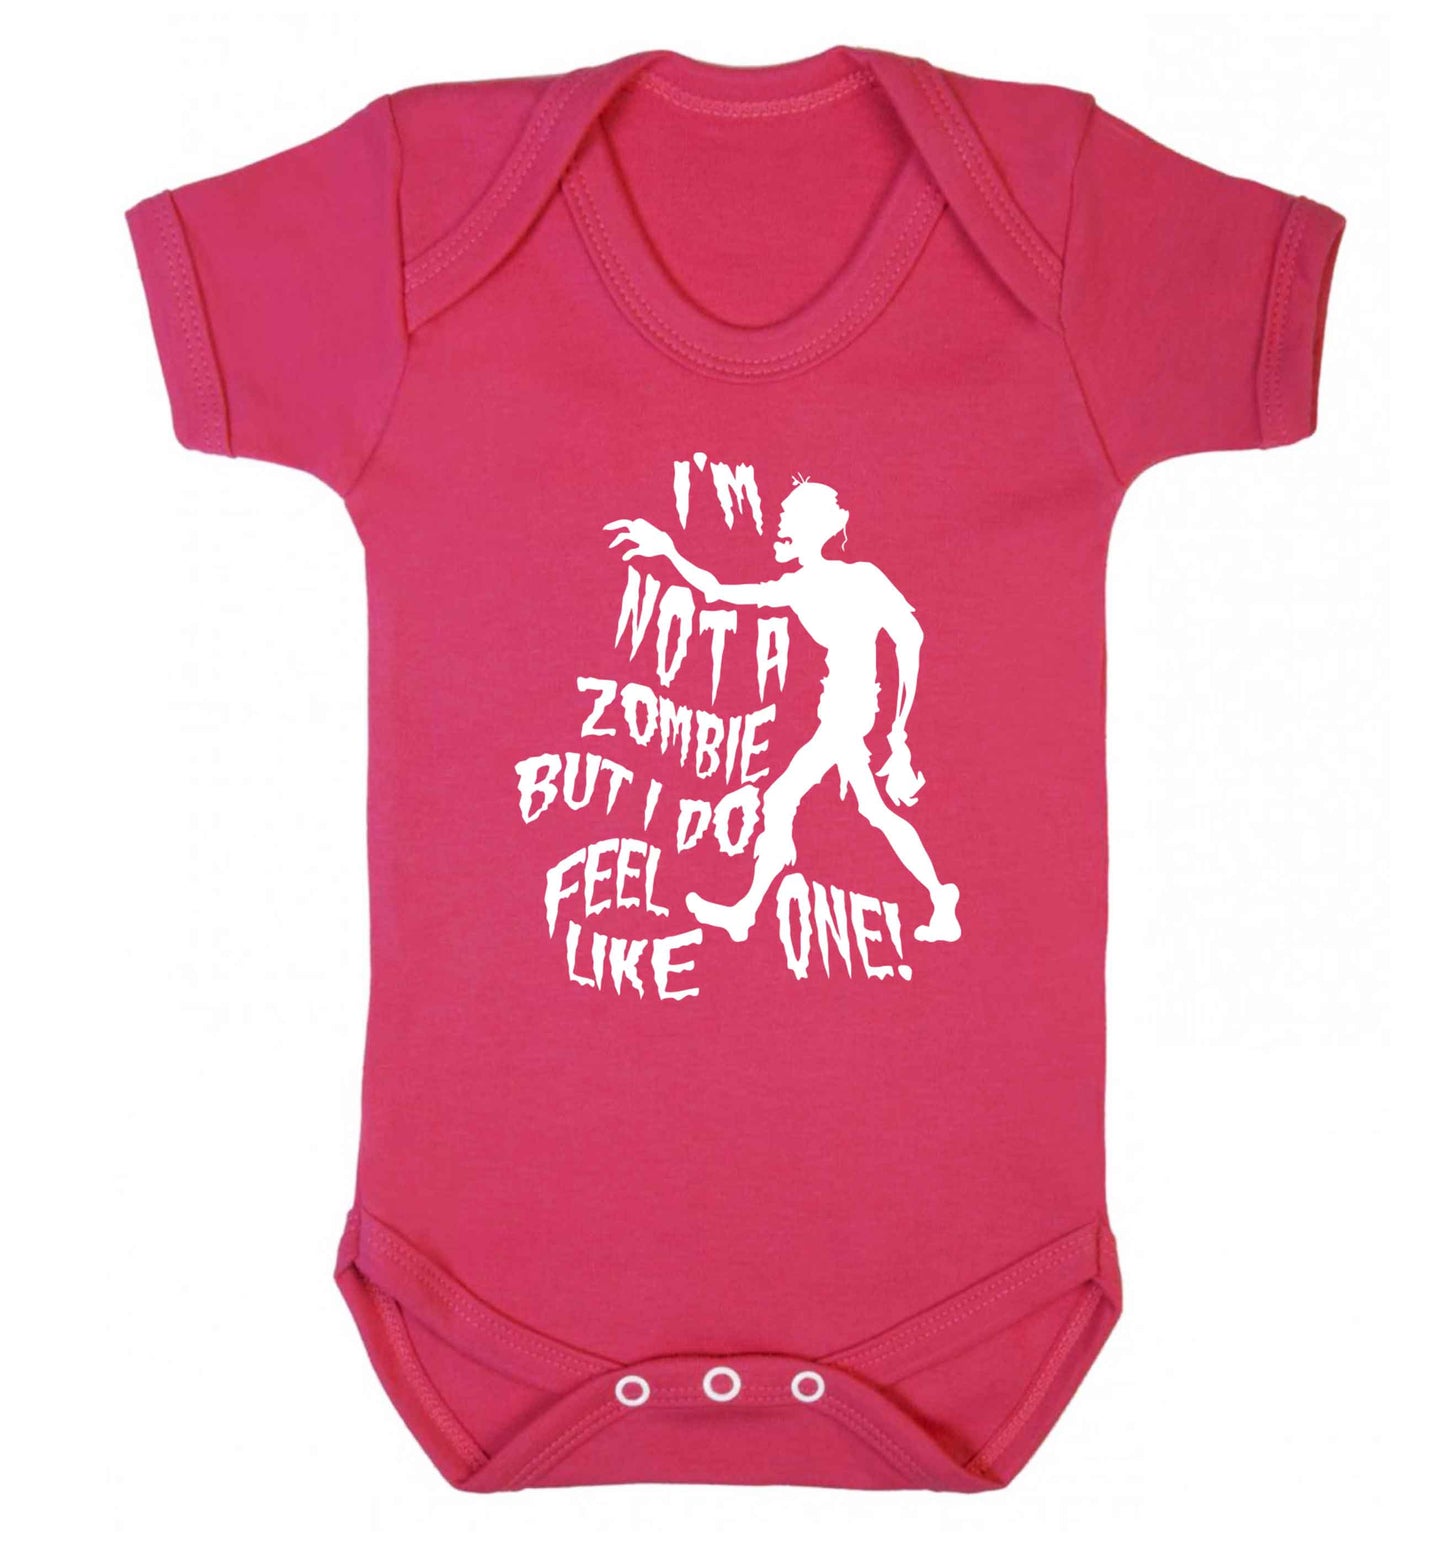 I'm not a zombie but I do feel like one! Baby Vest dark pink 18-24 months